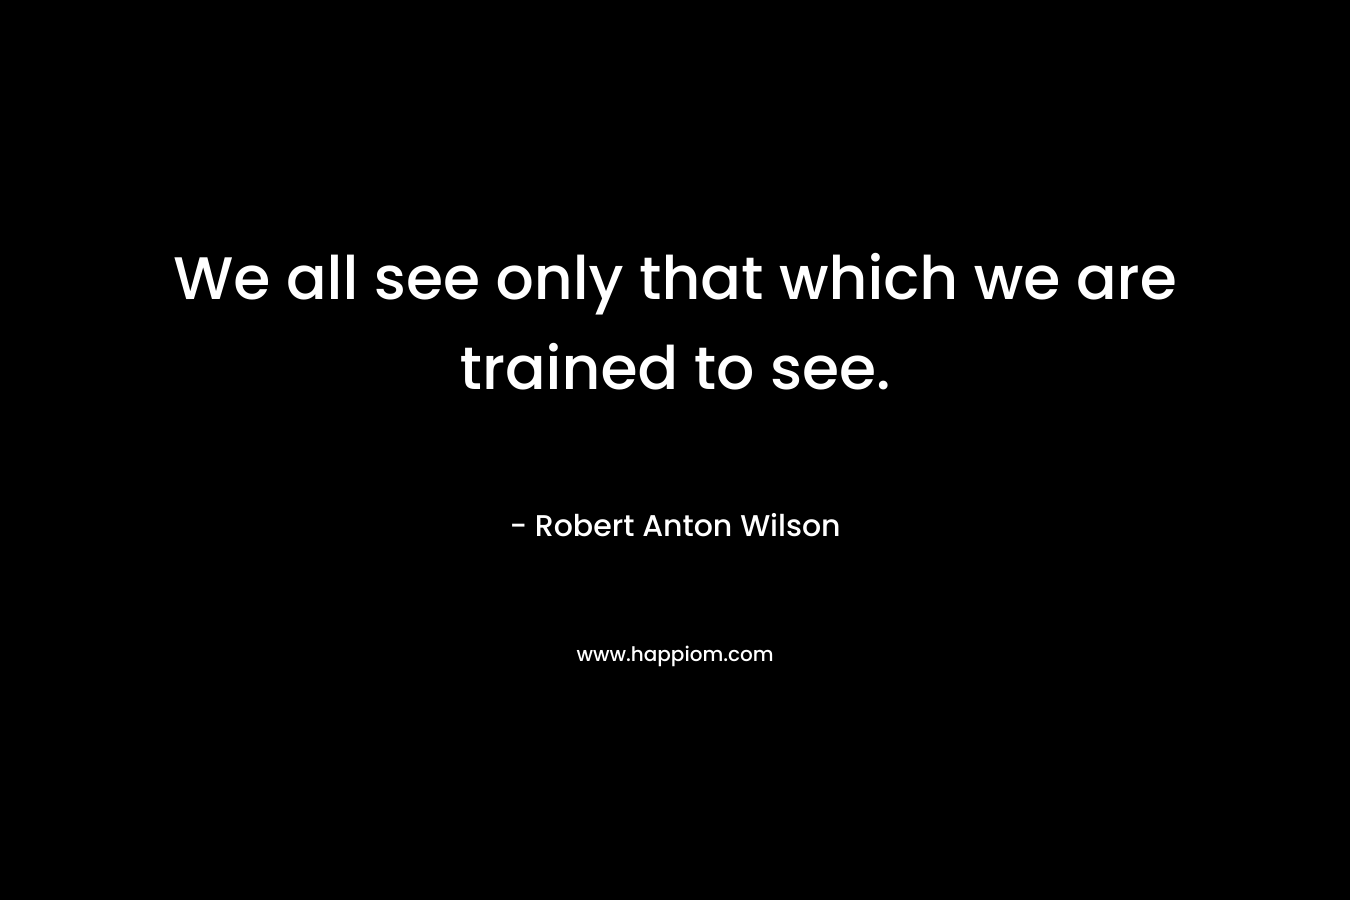 We all see only that which we are trained to see. – Robert Anton Wilson